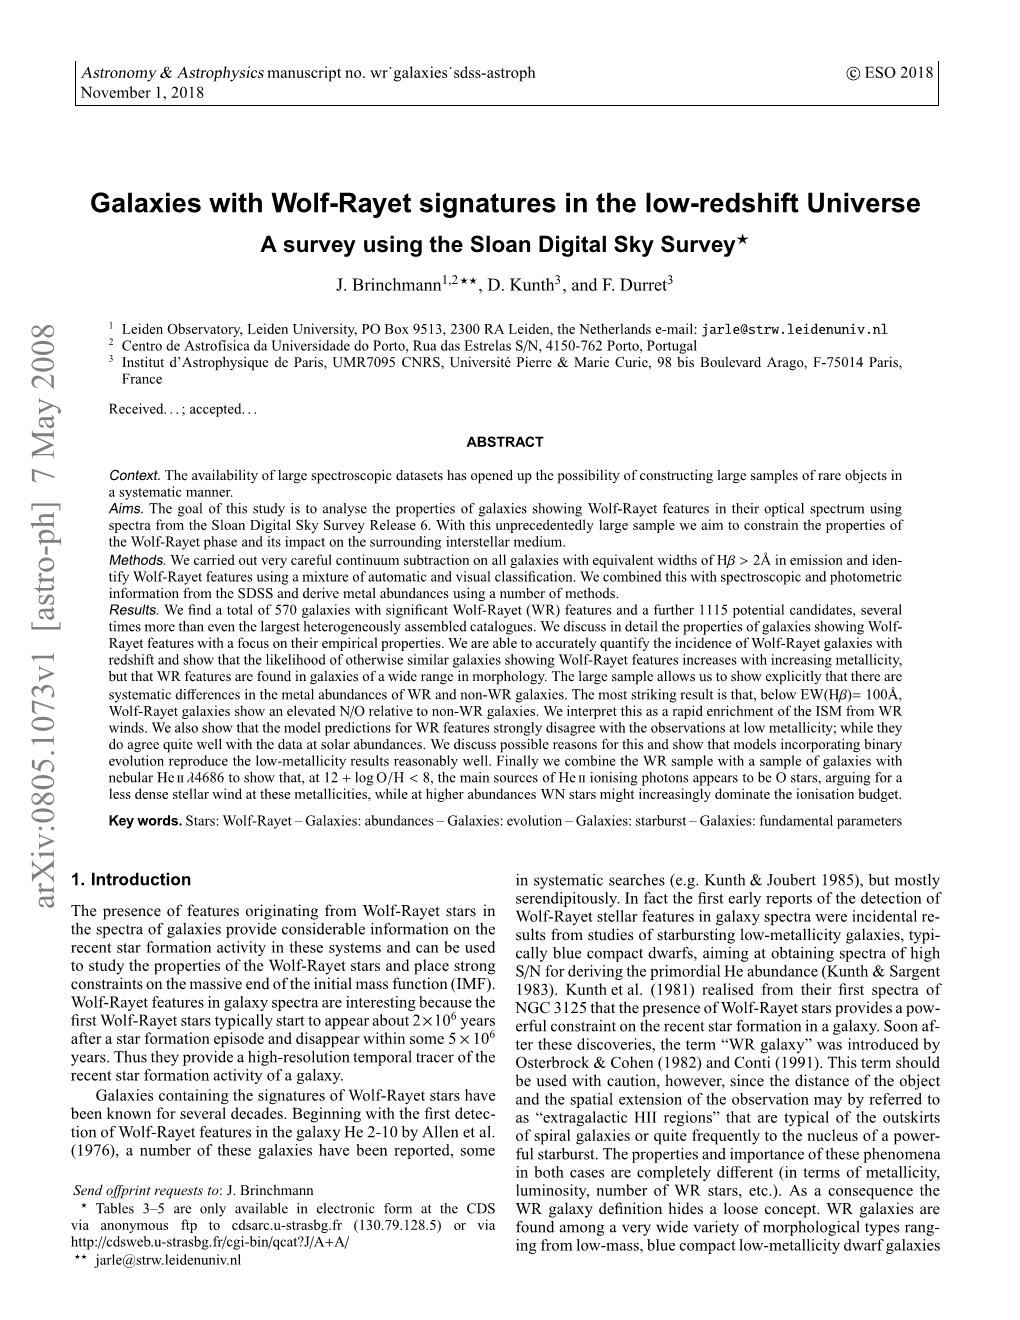 Galaxies with Wolf-Rayet Signatures in the Low-Redshift Universe